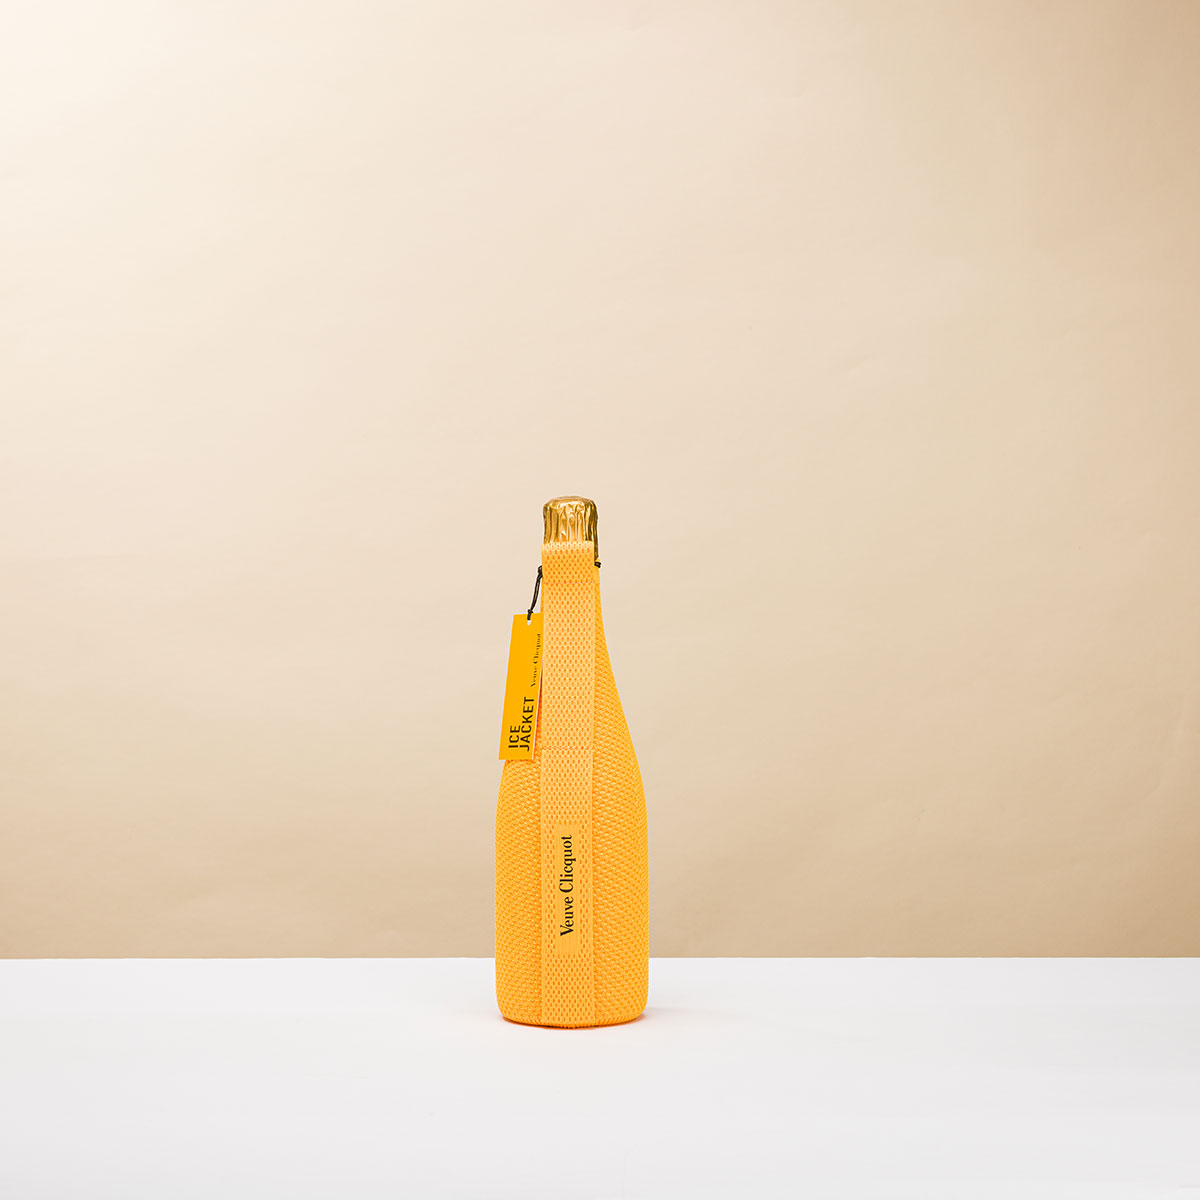 Champagne Veuve Clicquot Yellow Label in Ice Jacket [02]